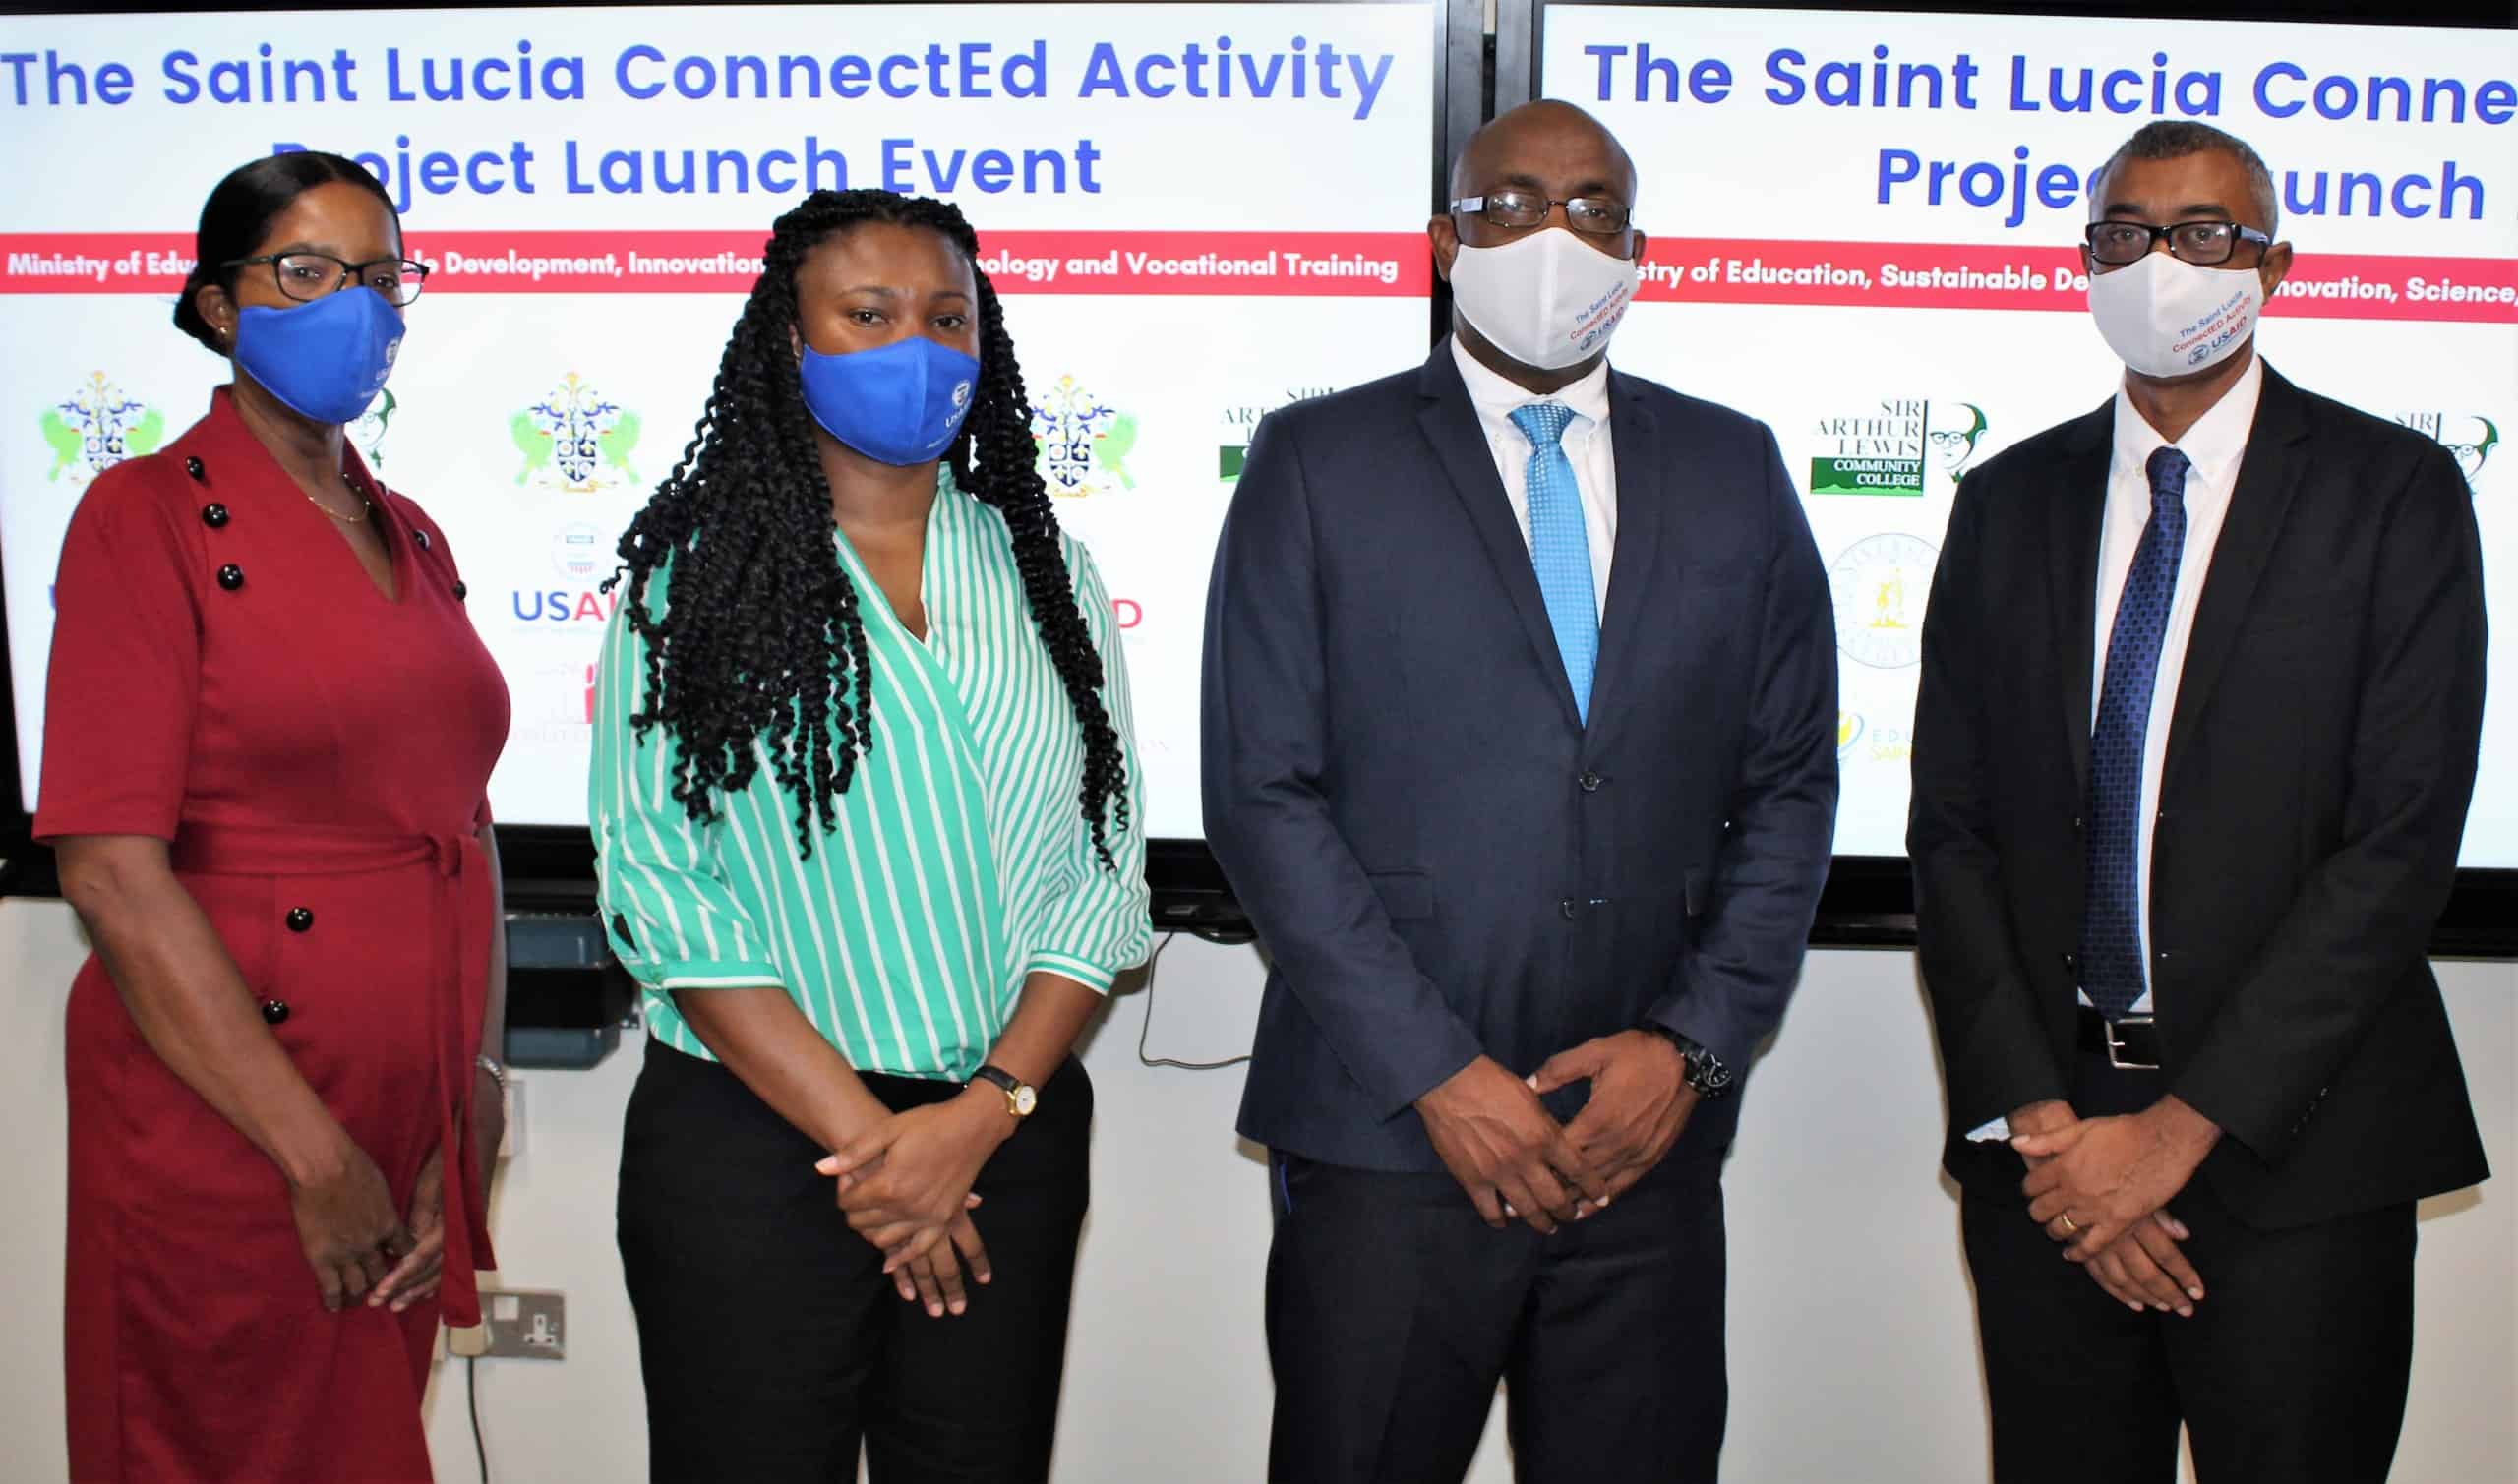 A Successful Launch Event for The Saint Lucia ConnectEd Activity